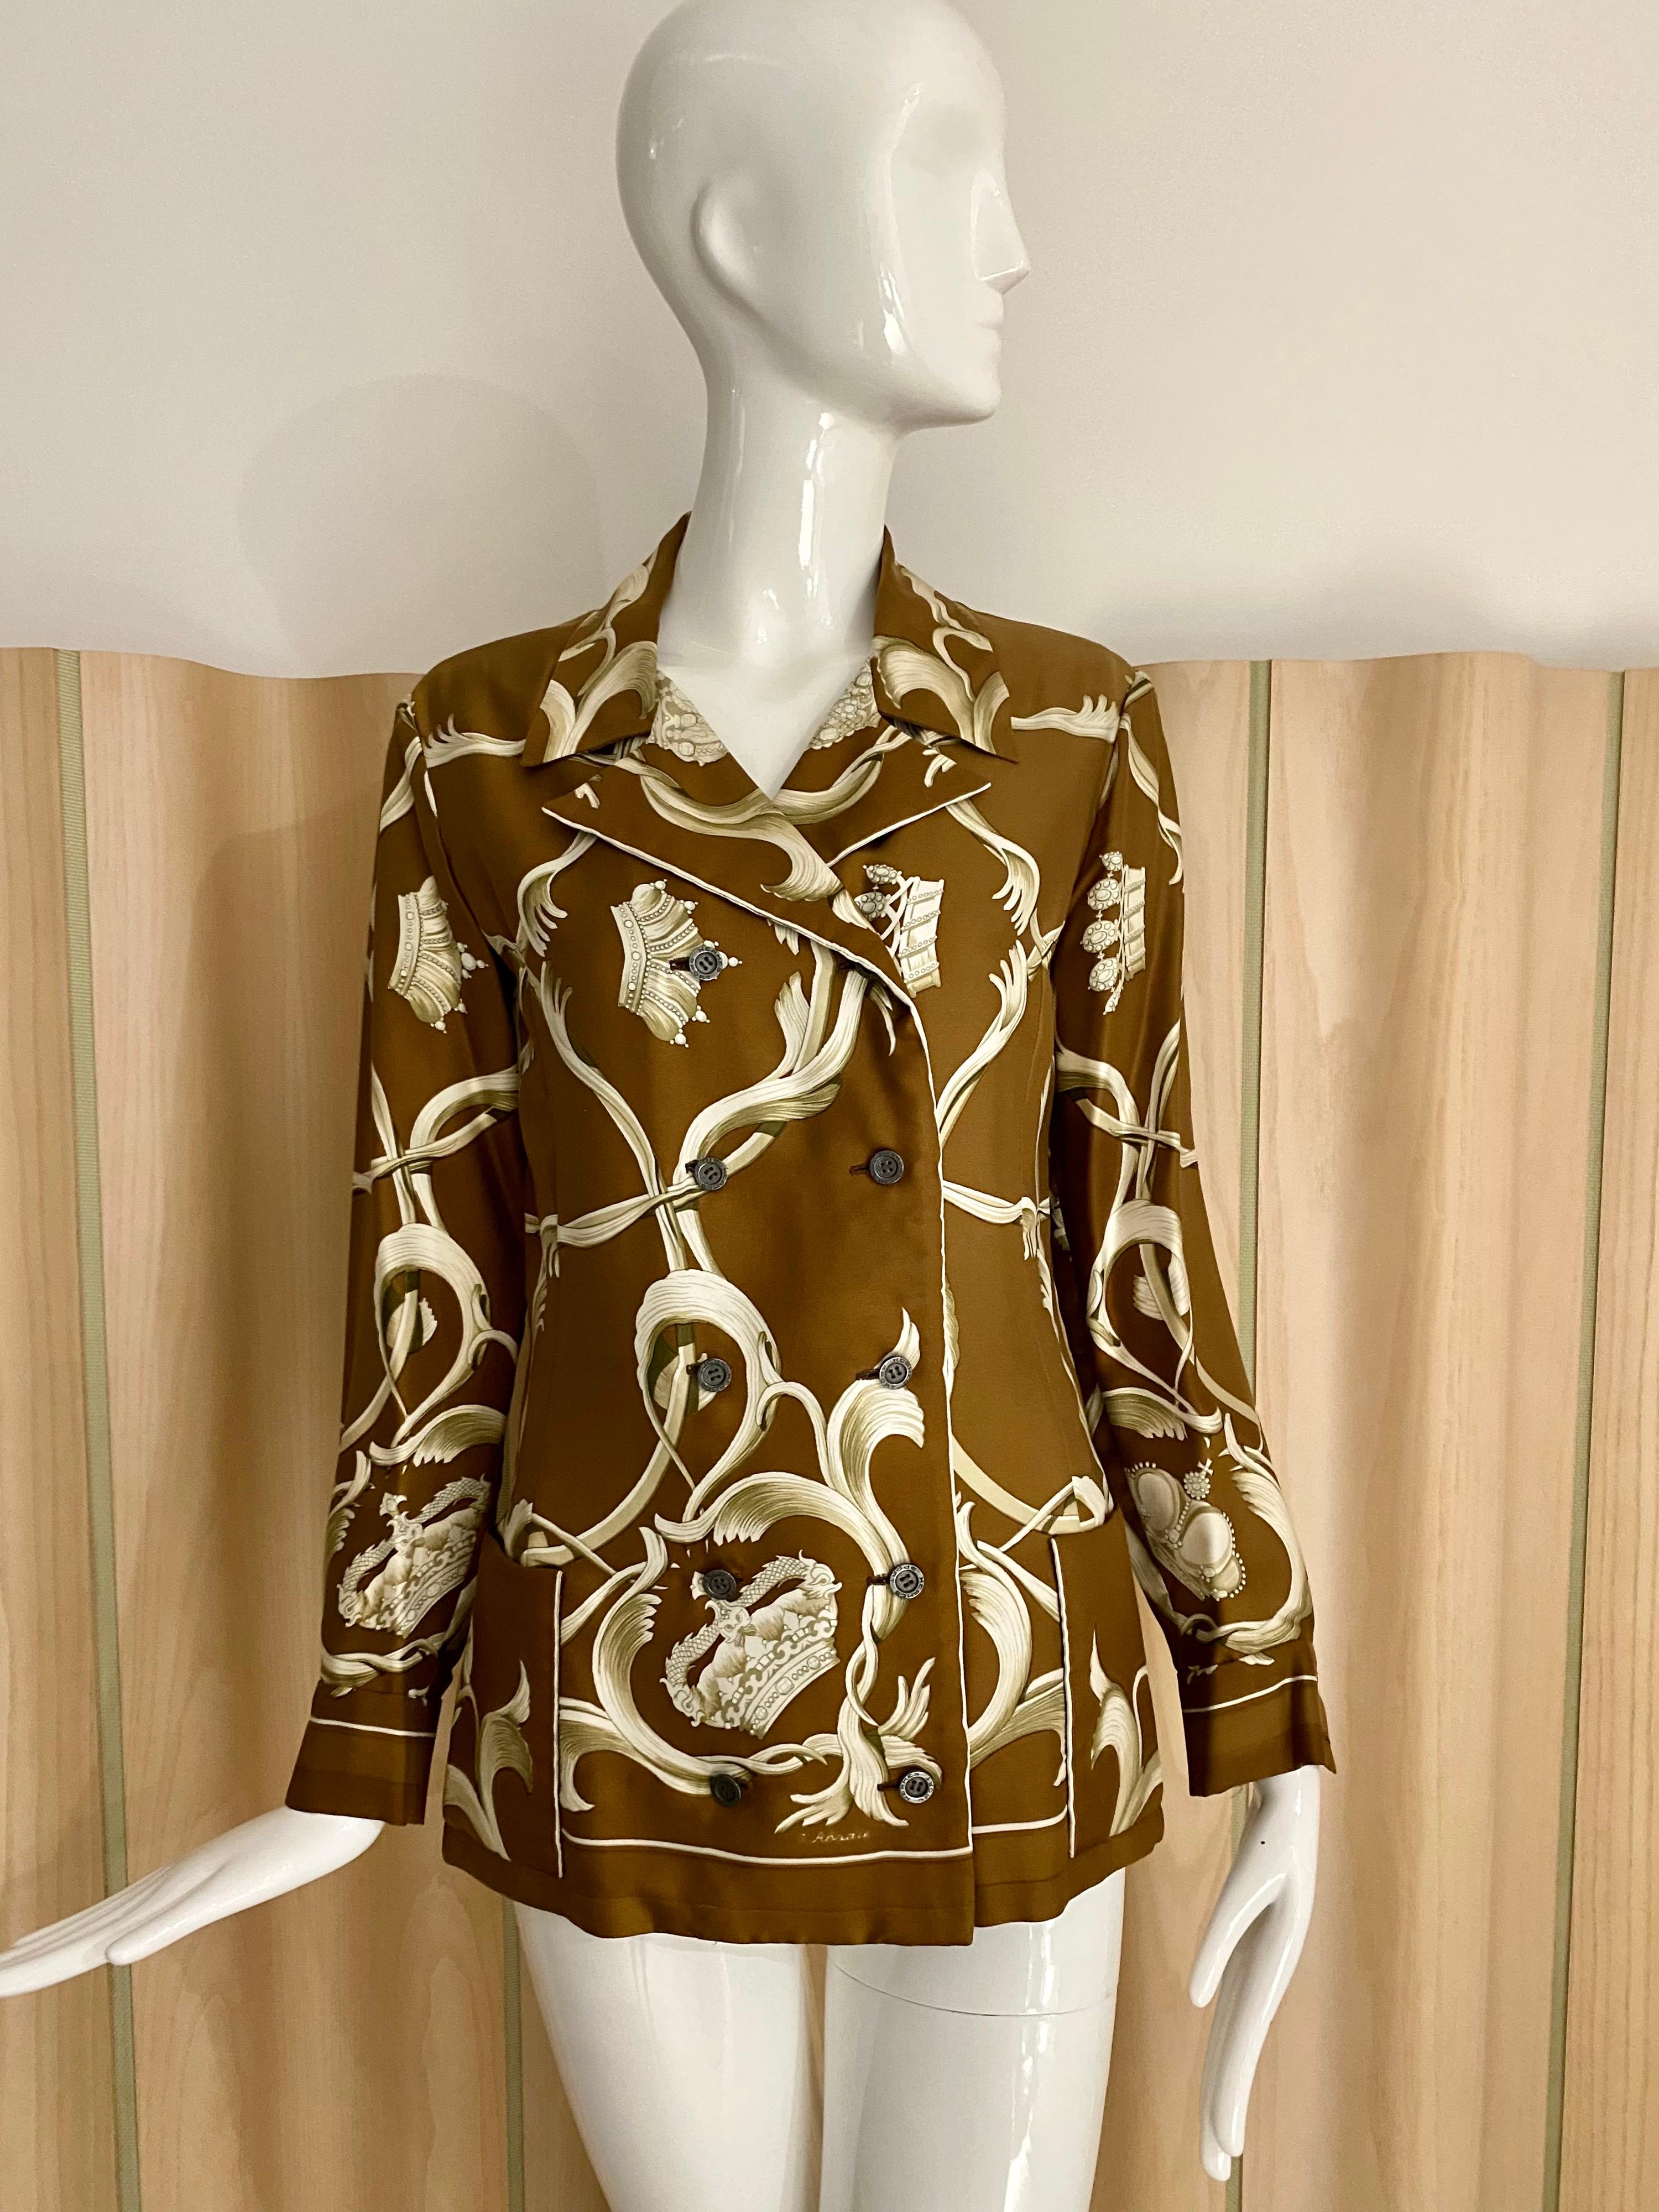 1970s Chic HERMES Silk Jacket/ Blazer silk print in Brown and creme. label : HERMES Sport
Fit size Small / US 2/4